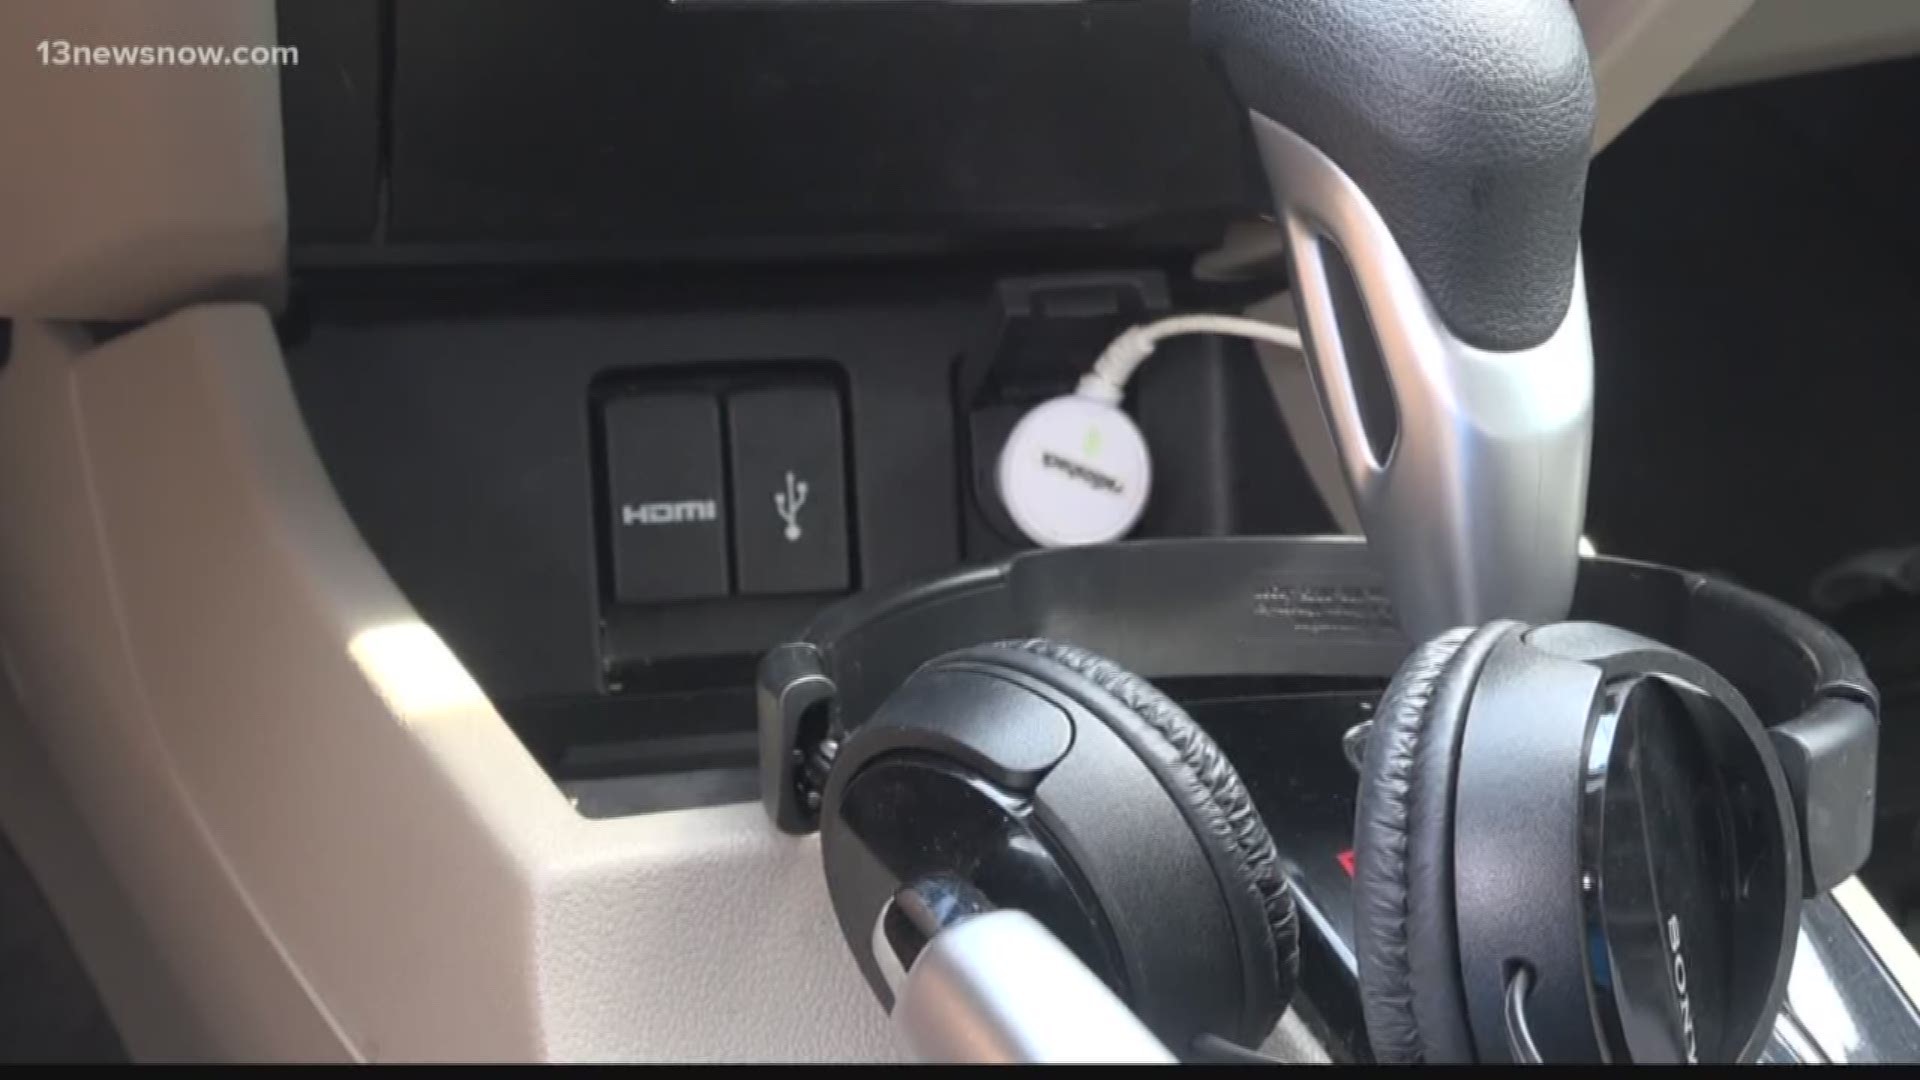 Is it legal to drive while wearing headphones? 13News Now viewer Jerri Michael asked so we set out to verify.